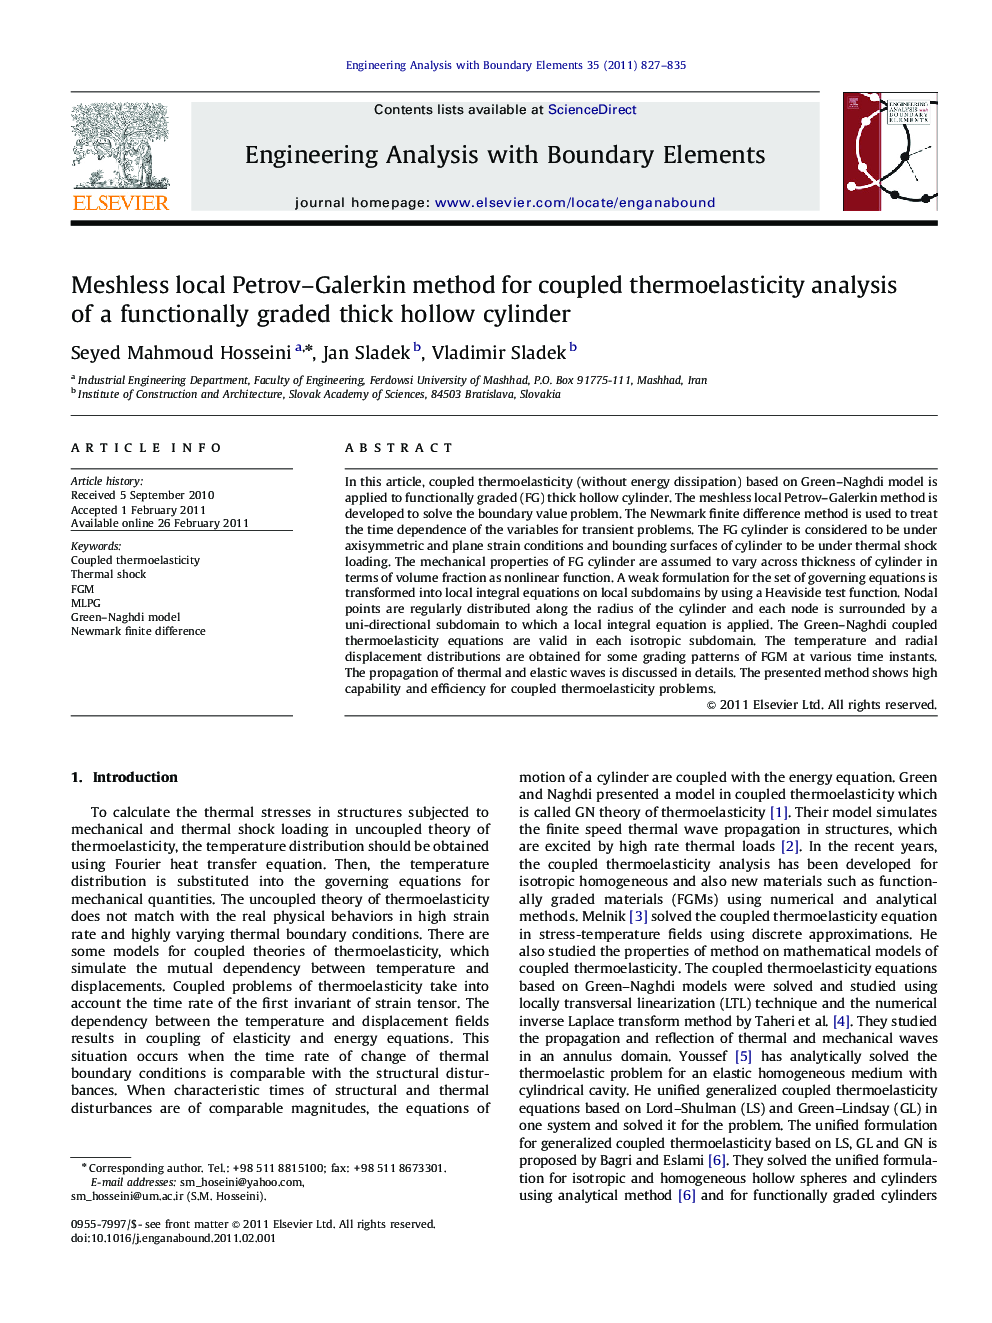 Meshless local Petrov–Galerkin method for coupled thermoelasticity analysis of a functionally graded thick hollow cylinder